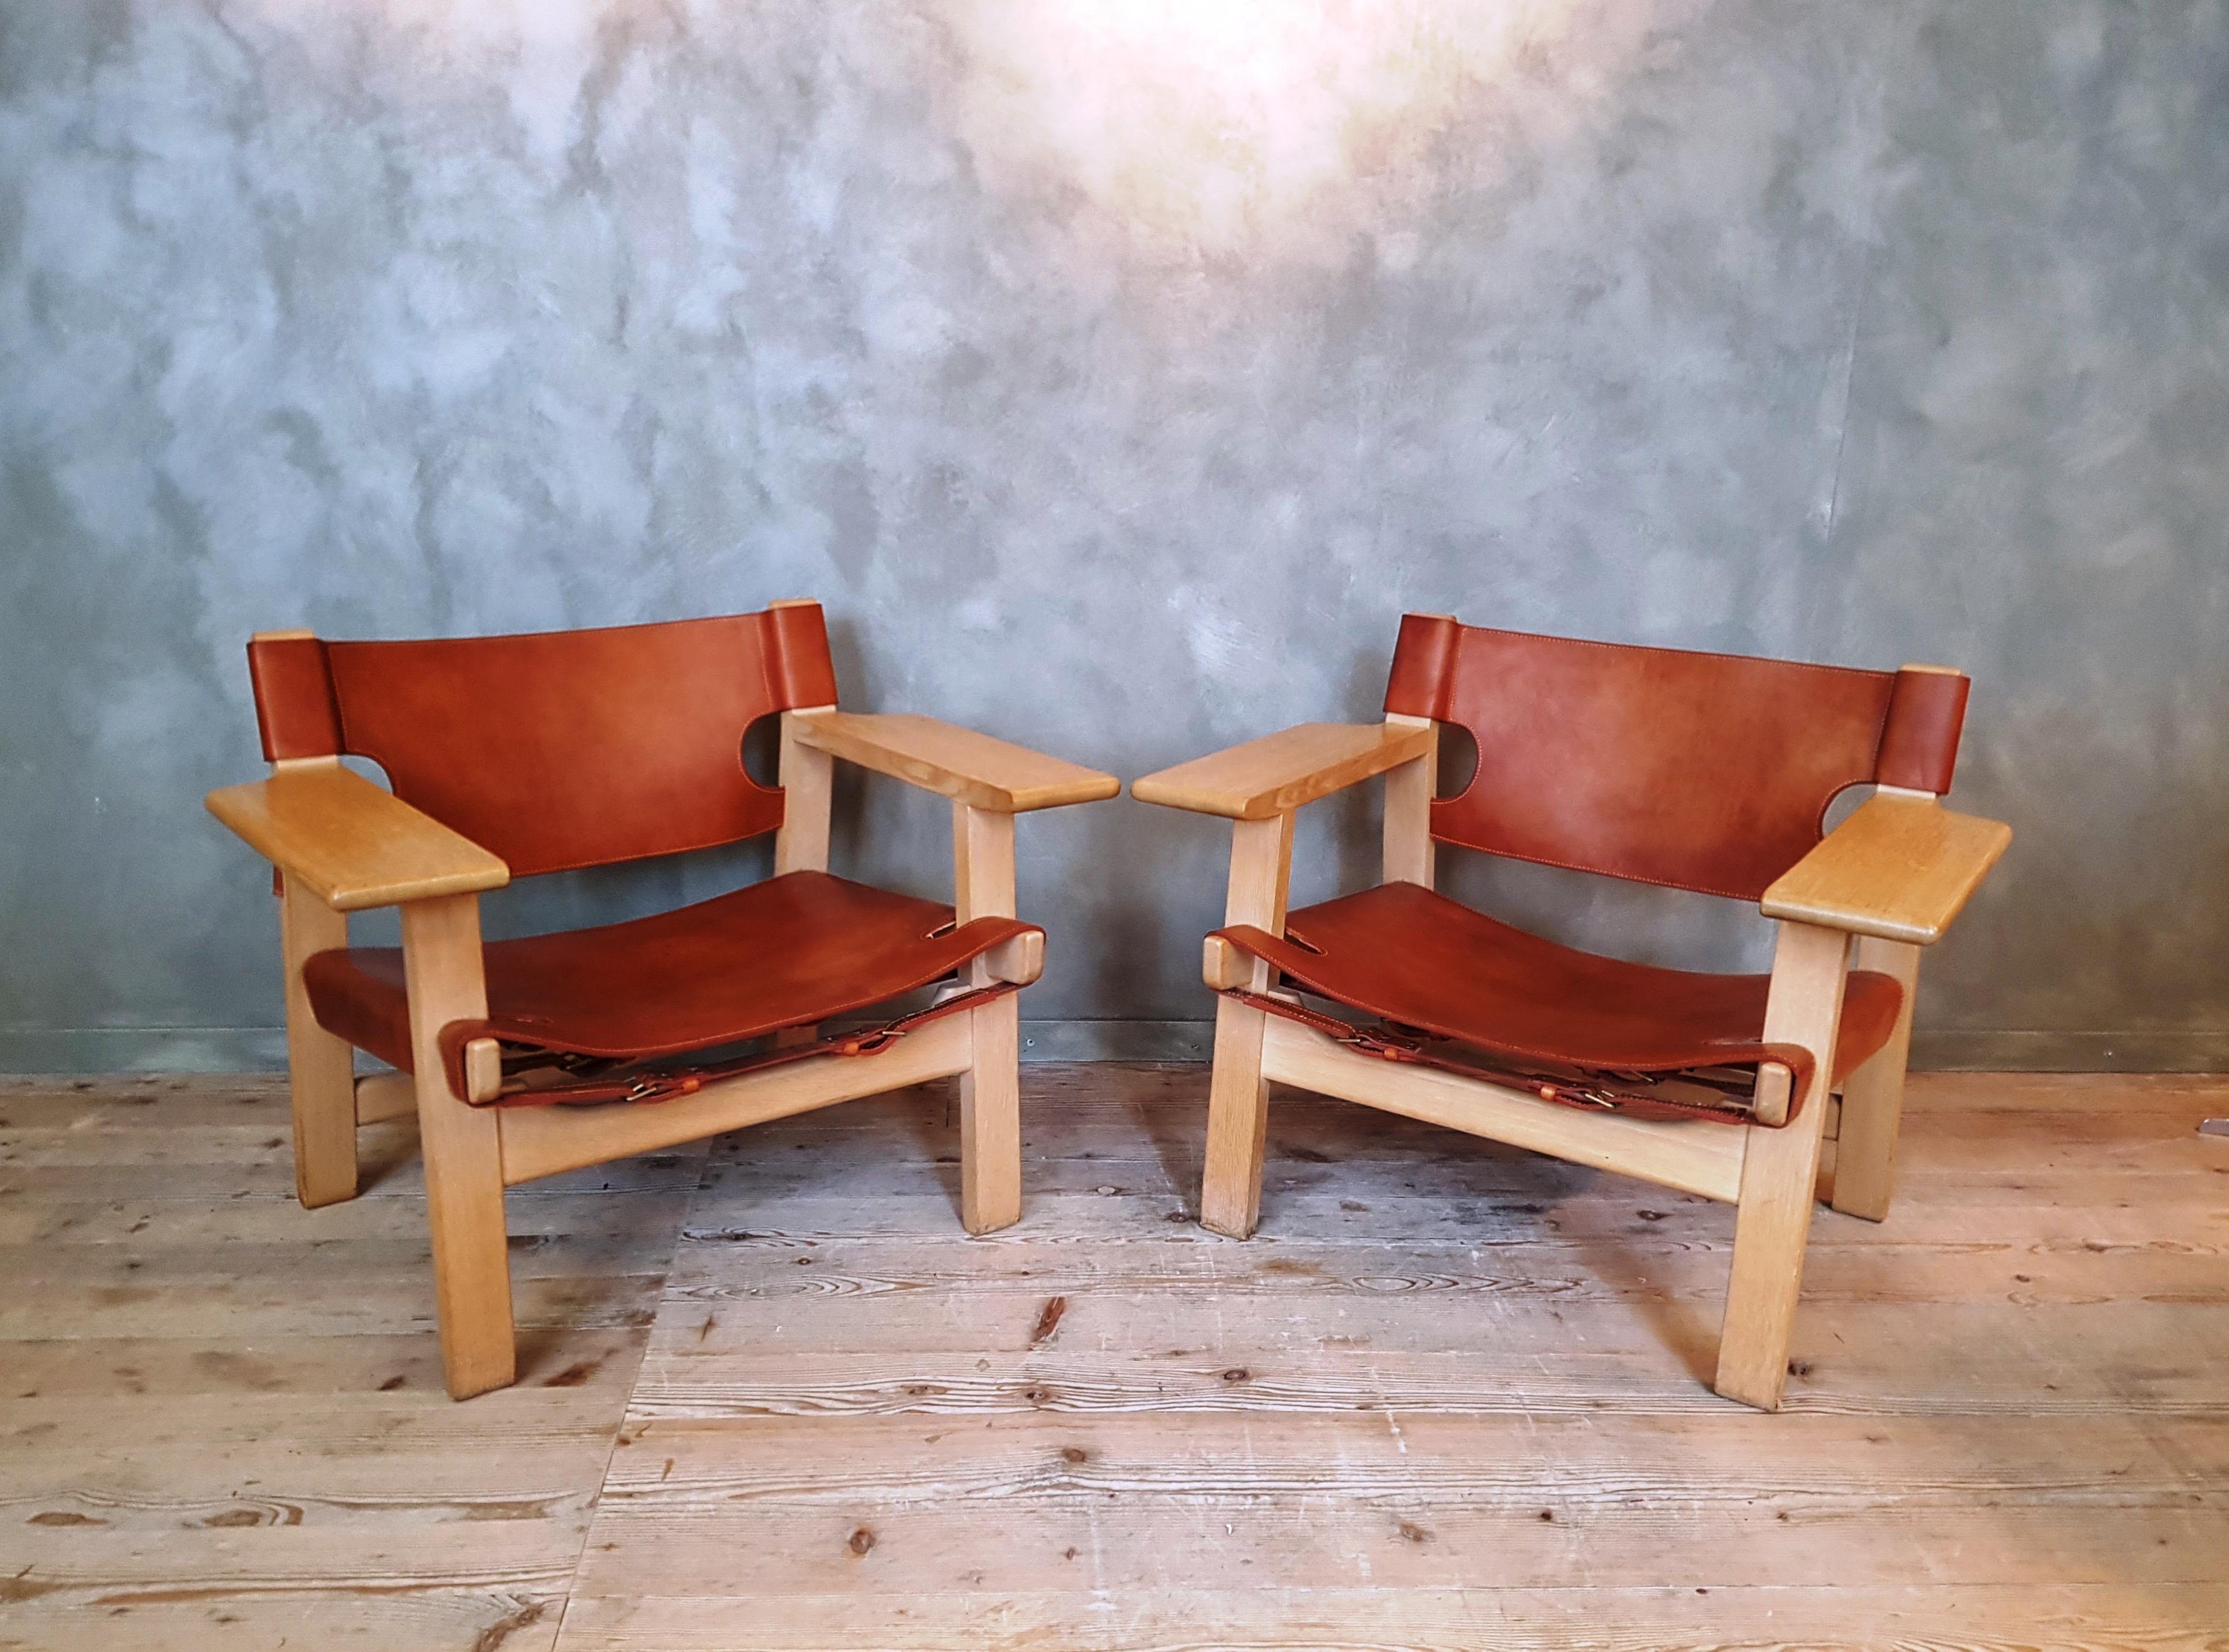 The Spanish chair was designed by Børge Mogensen for Fredericia. It is made of solid oak and saddle leather with brass belt buckles. The wide armrests provide storage space.
This pair of Spanish chairs are in a very good condition, the leather has